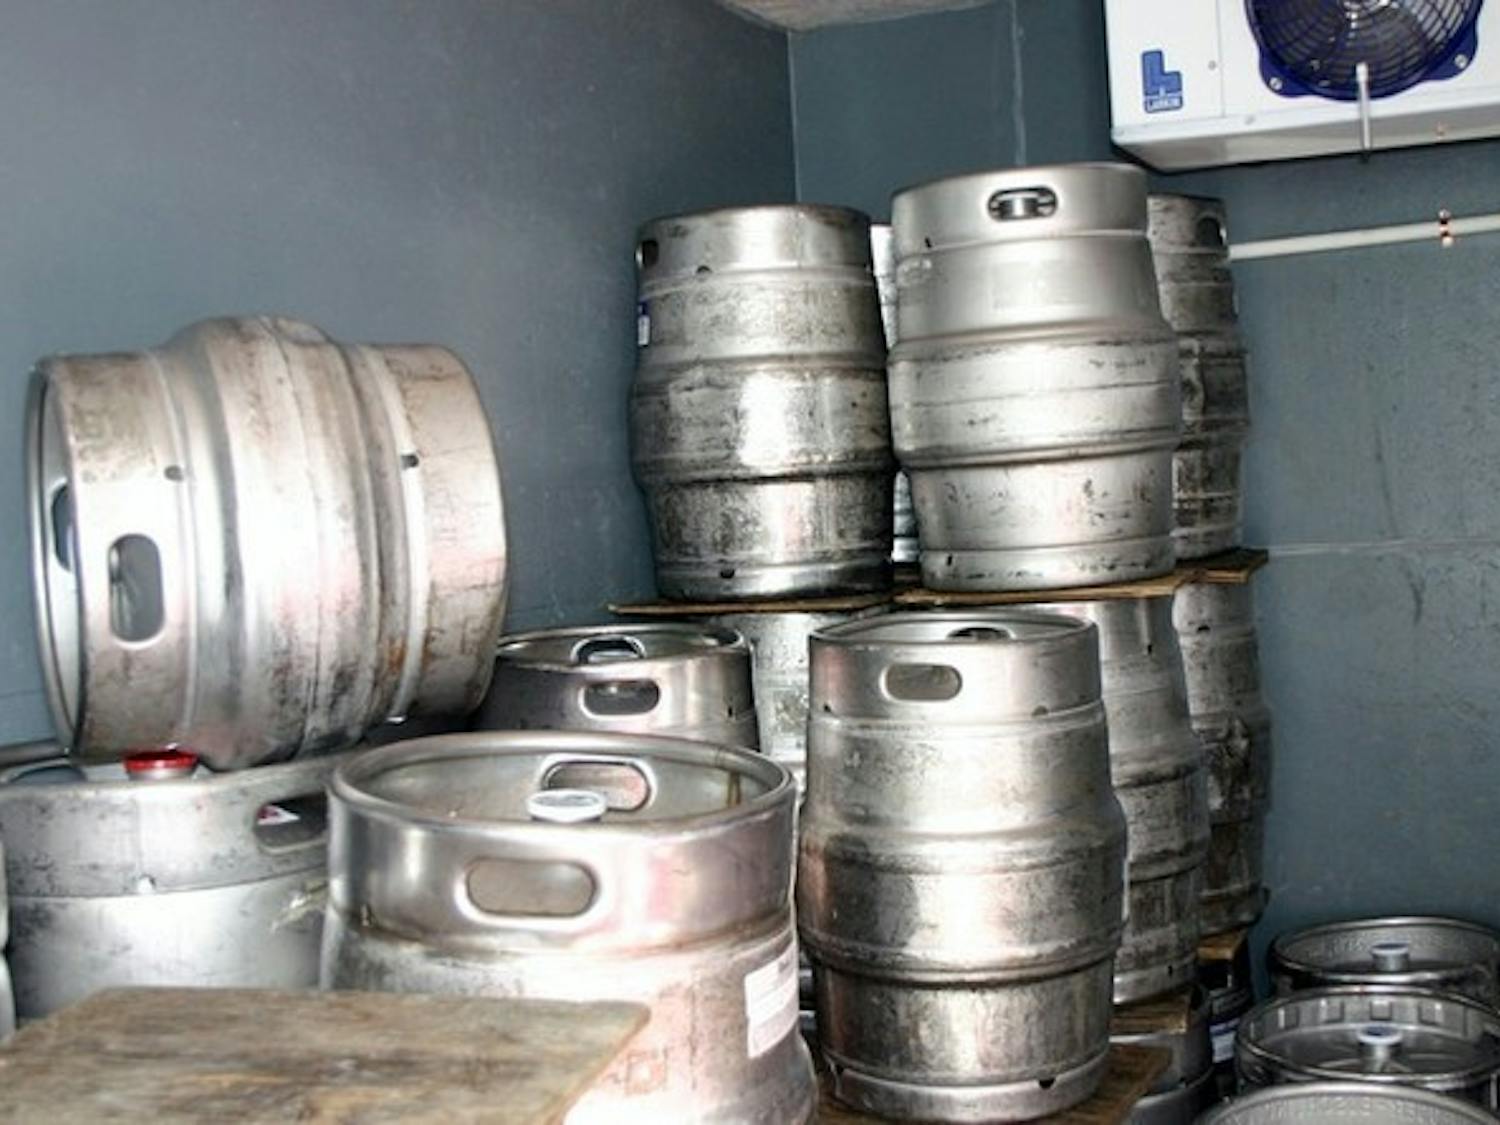 New SEMP guidelines ease exemptions for using kegs at outdoor events,